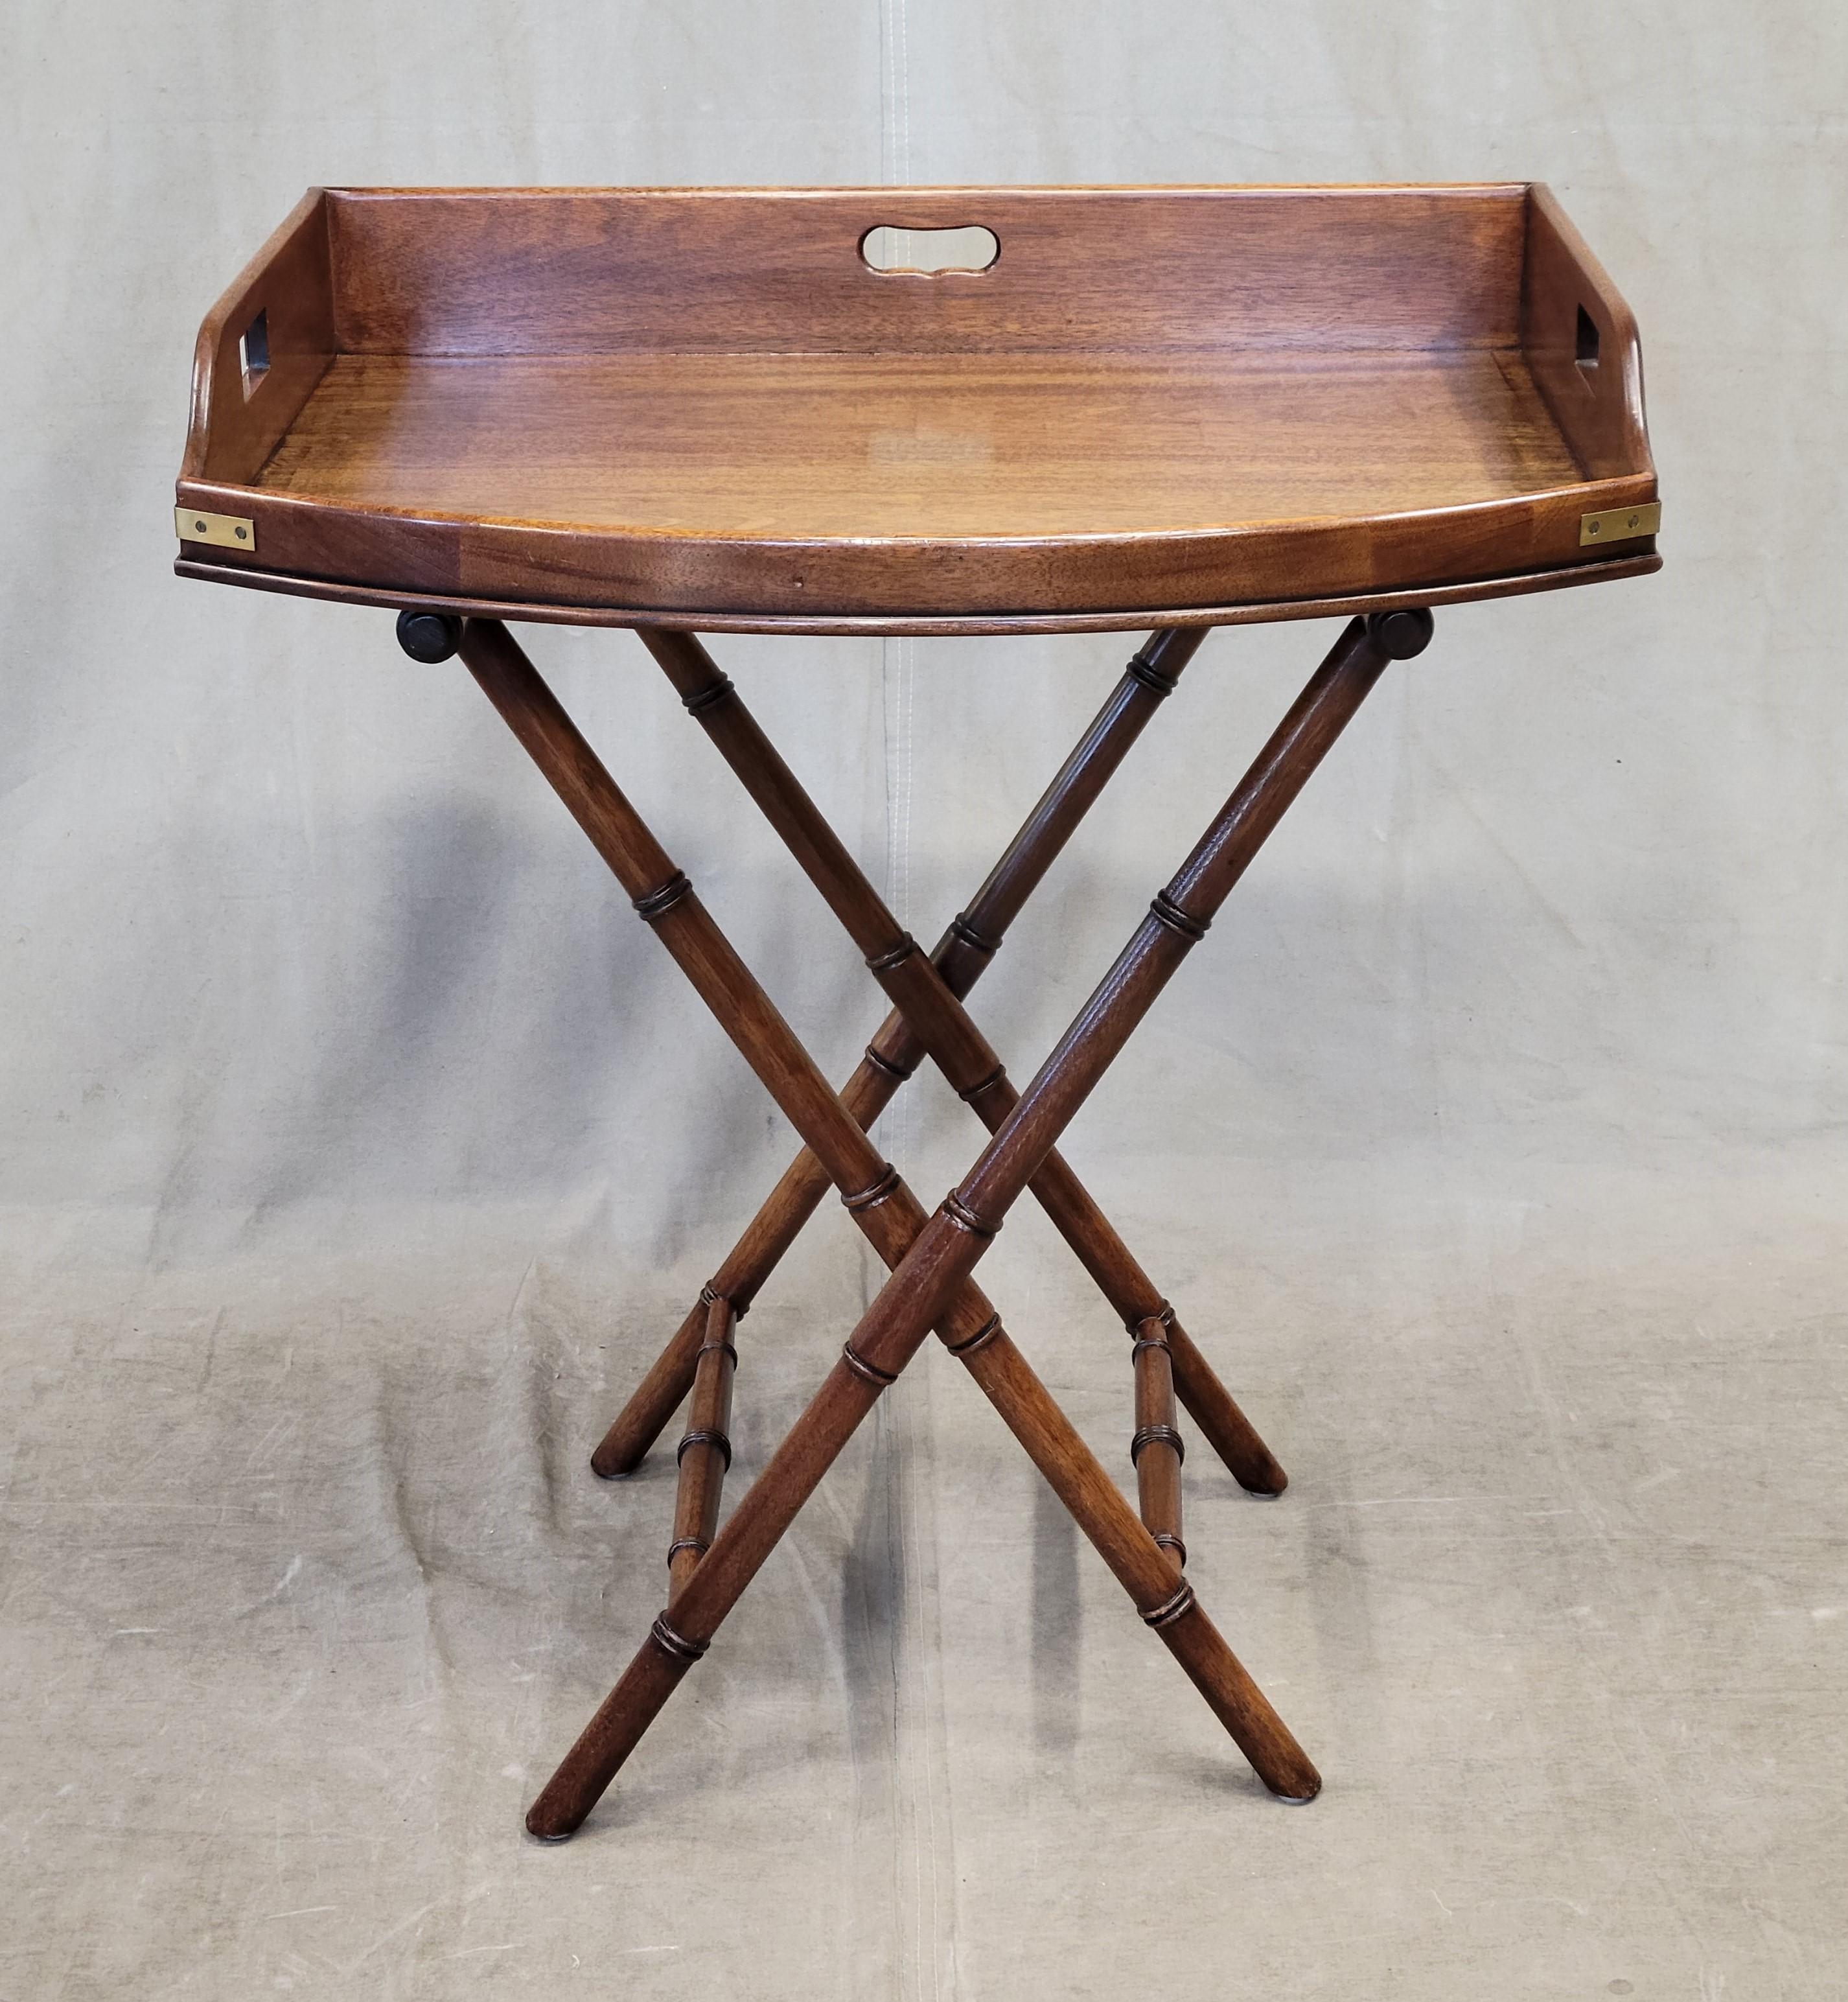 Perfect for the holidays is this stunning Henredon mahogany campaign style butler's tray table. The tray is removable and sits on a faux bamboo folding base, not only beautiful but so practical. Brass campaign style hardware contrasts with the